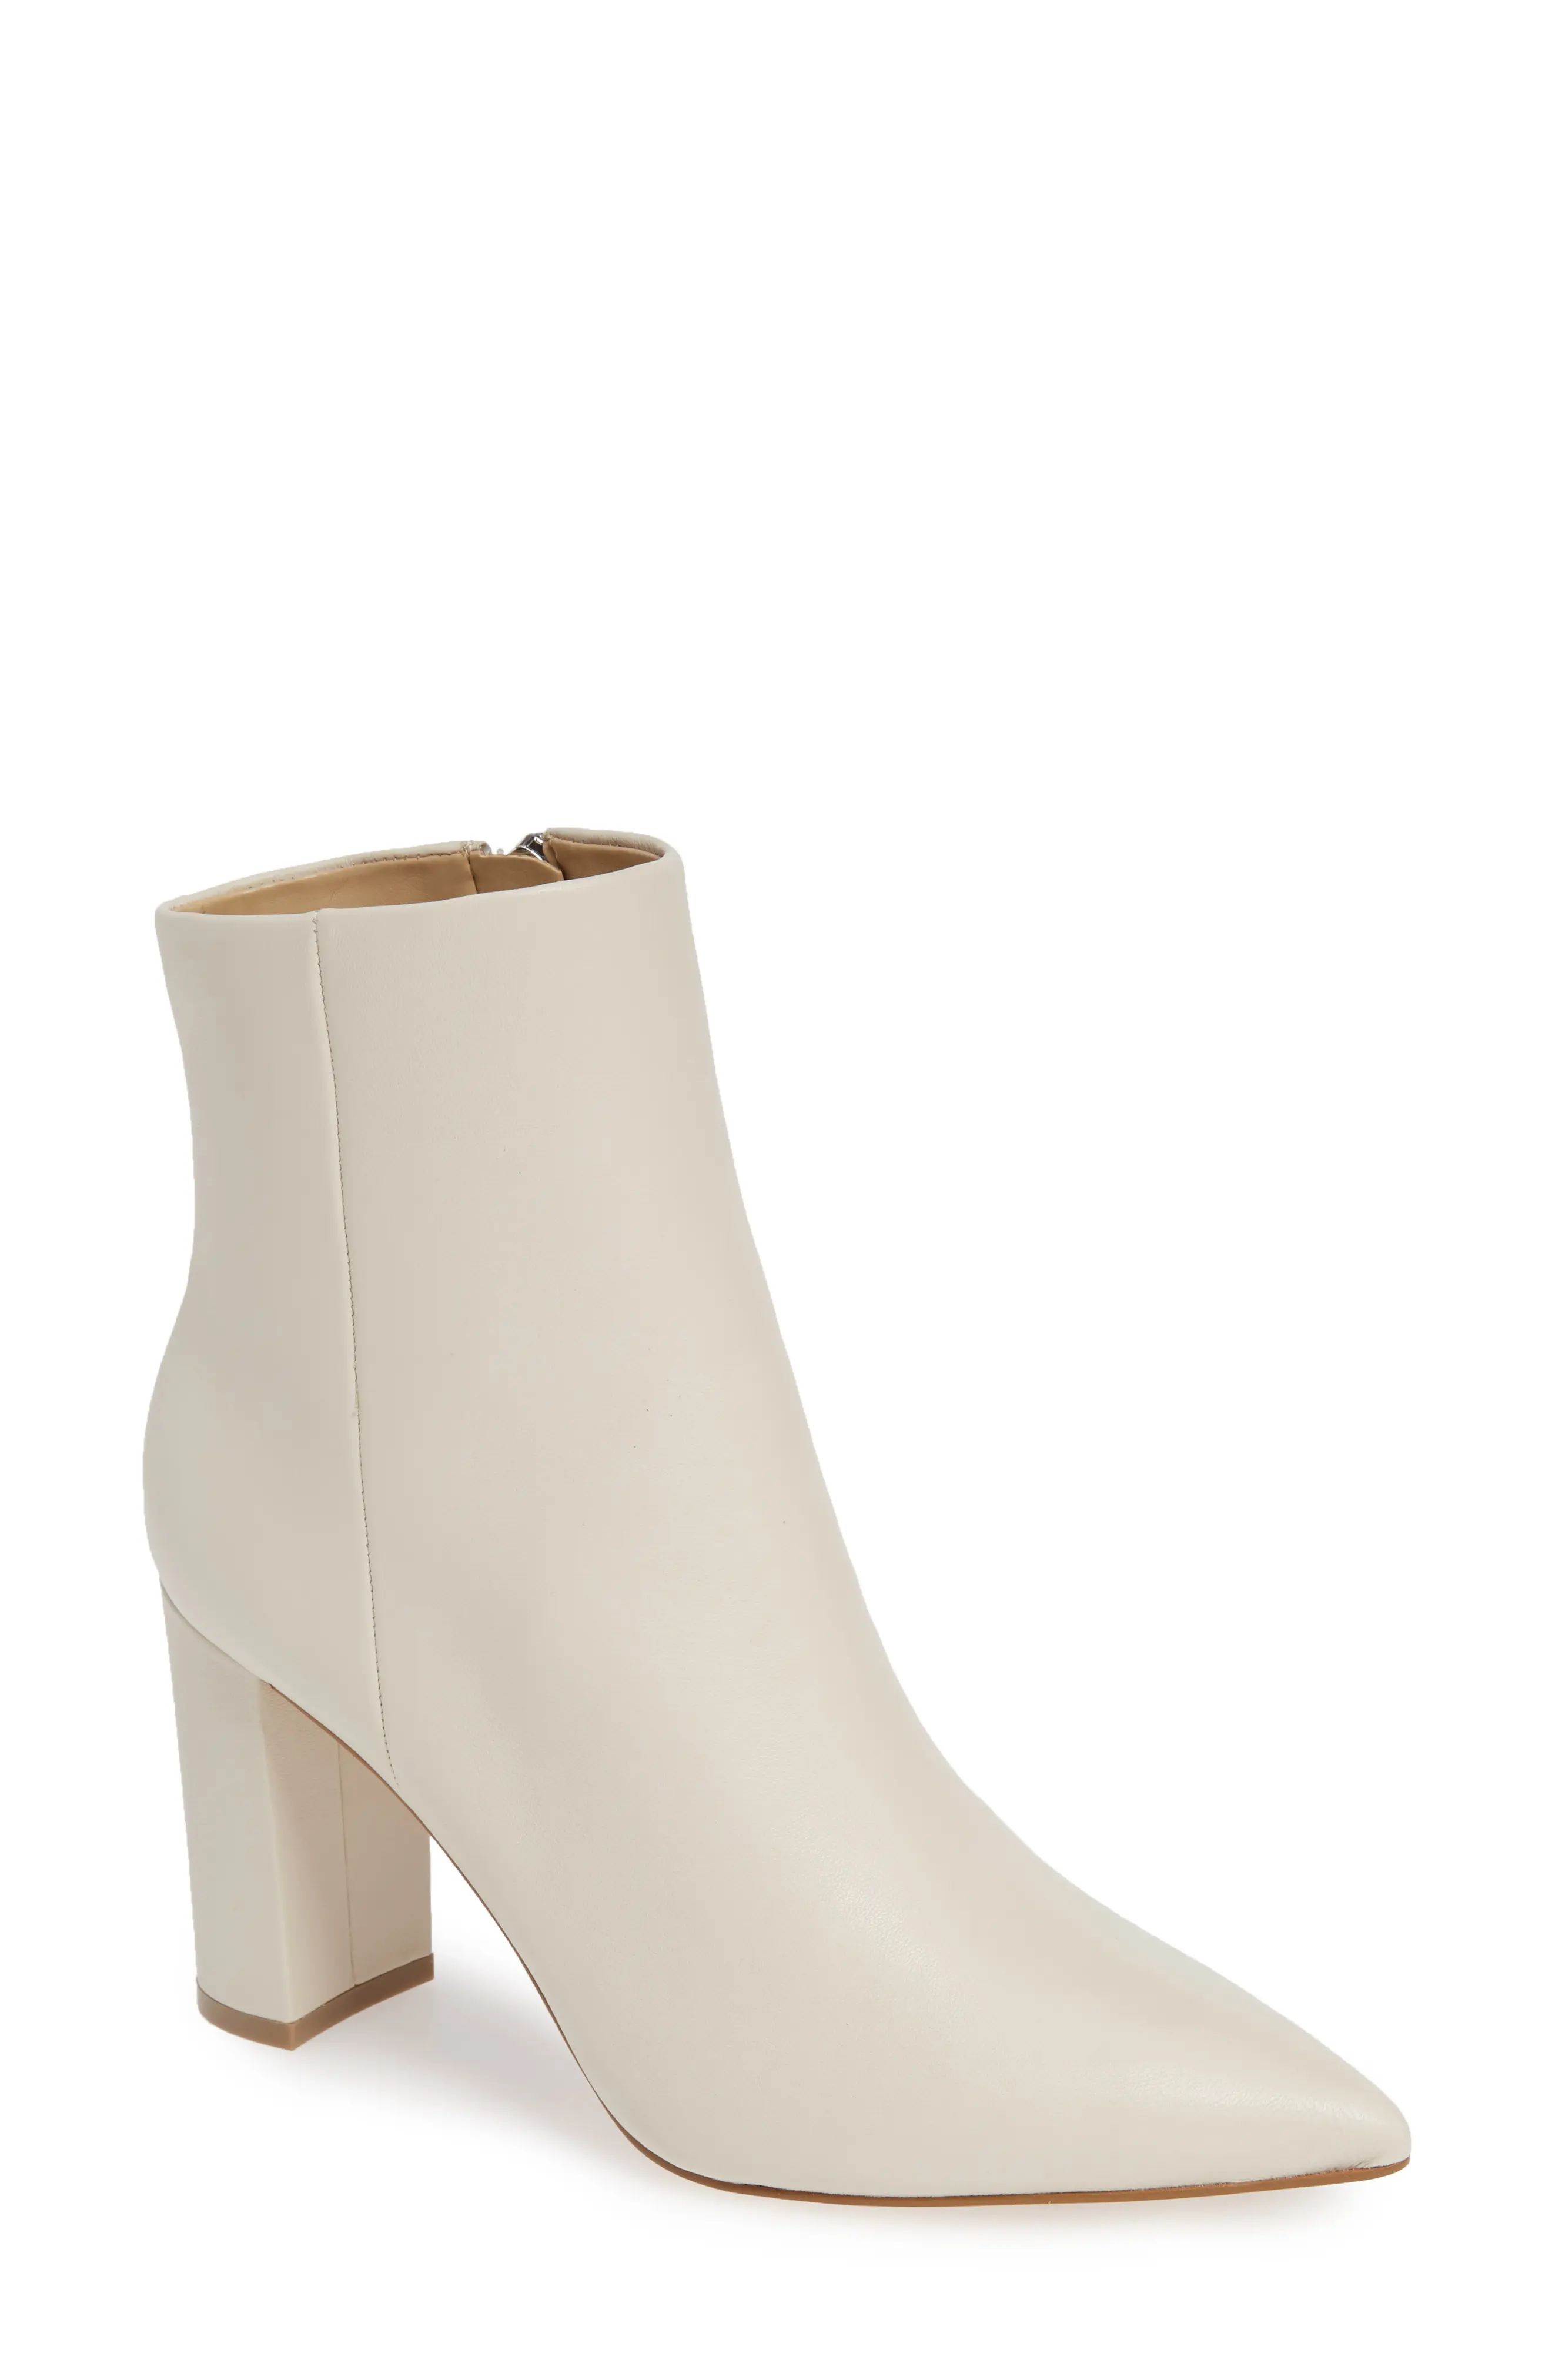 Women's Marc Fisher Ltd. Ulani Pointy Toe Bootie, Size 5 M - White | Nordstrom